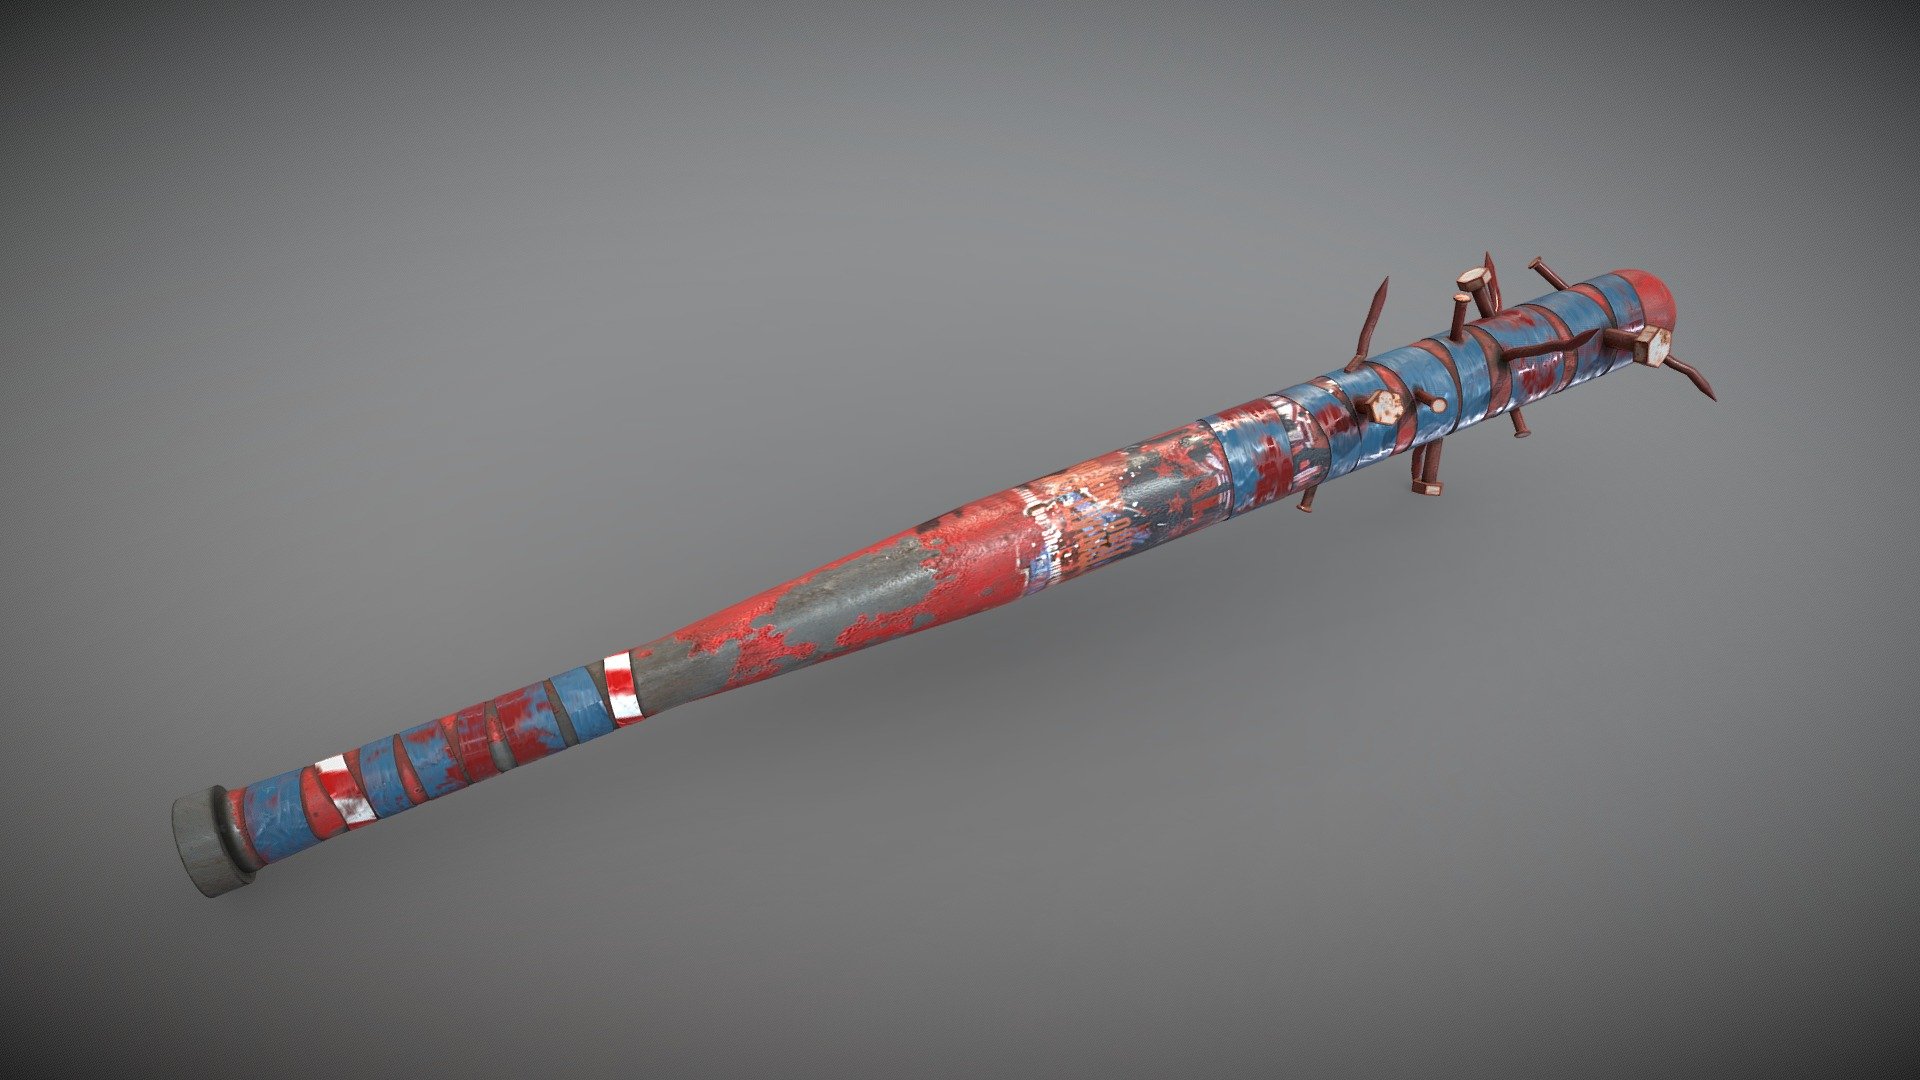 Post Apocalyptic Baseball Bat

Textures size 4096x4096

Including maps: * Base Color * Roughness * Metallic * Normal * Height * AO

Created in Blender The texture was created in Substance 3D Painter - Baseball Bat - Download Free 3D model by exiS7-Gs 3d model